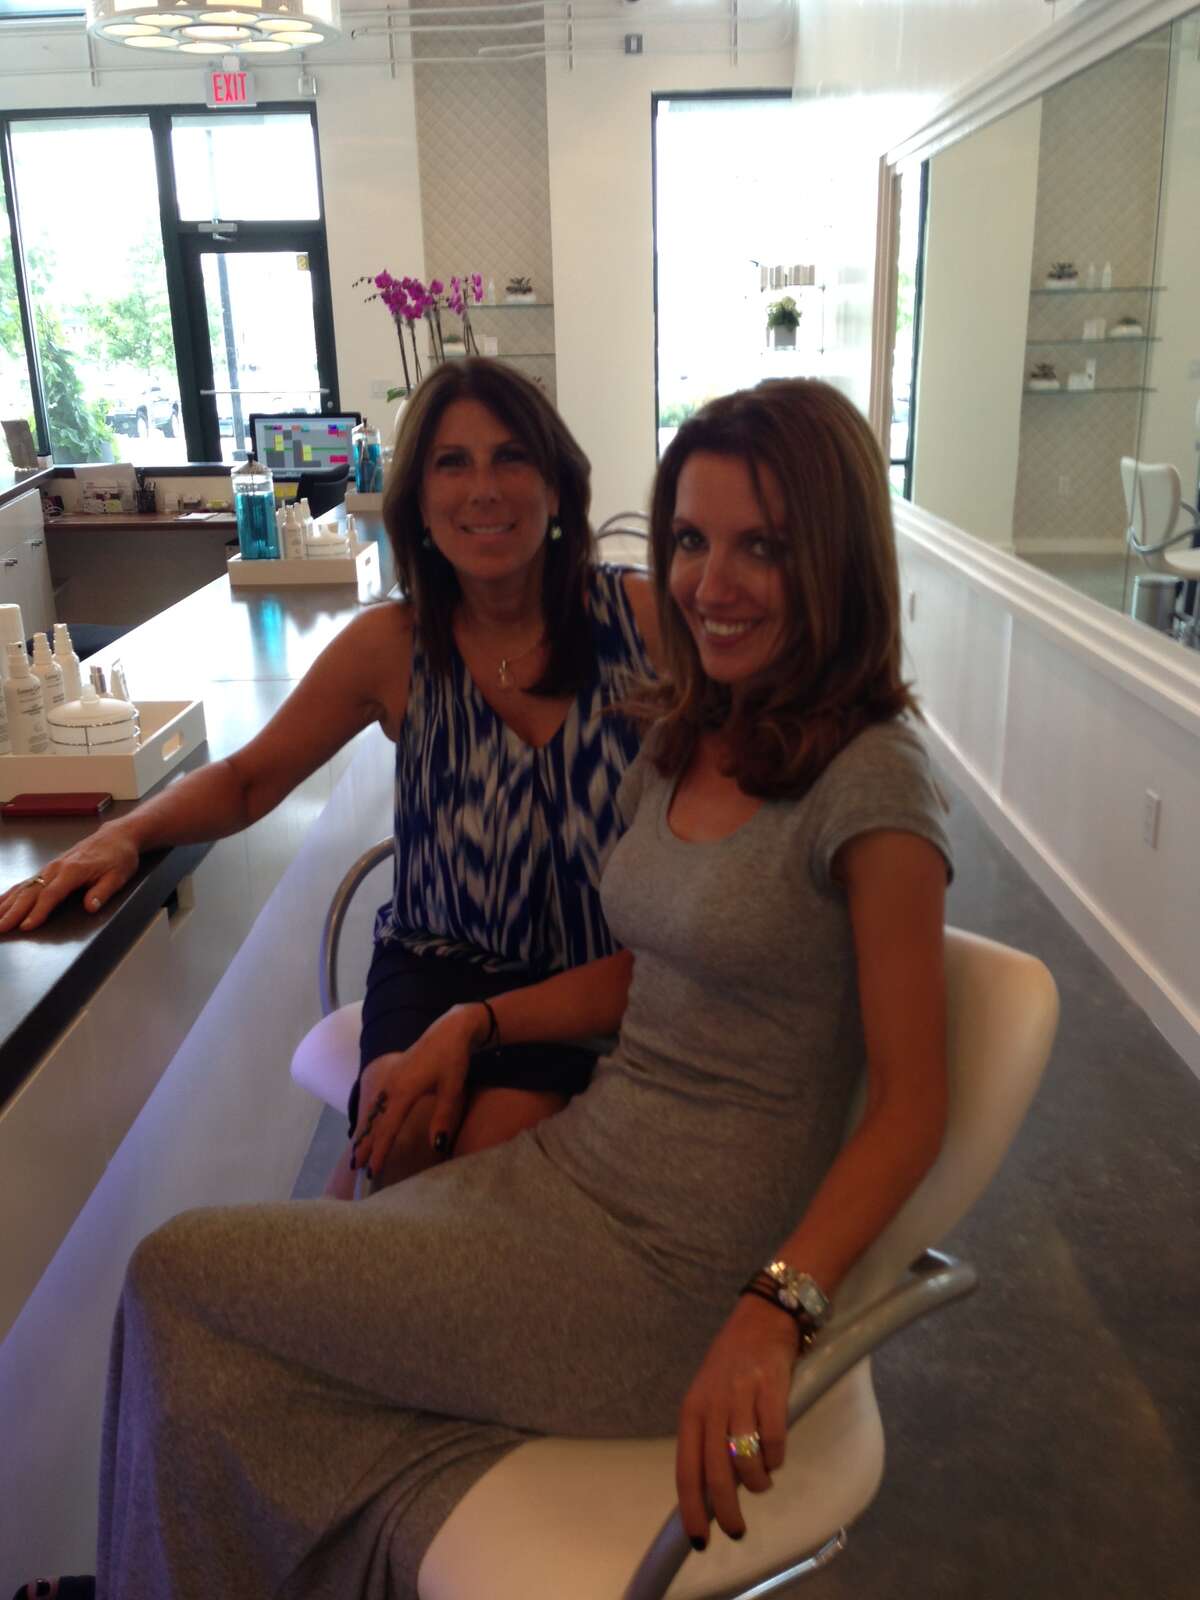 Quinn Caravella and Liria Heidenreich at their new salon The Style Bar in Stamford's Lockworks Building in Harbor Point.